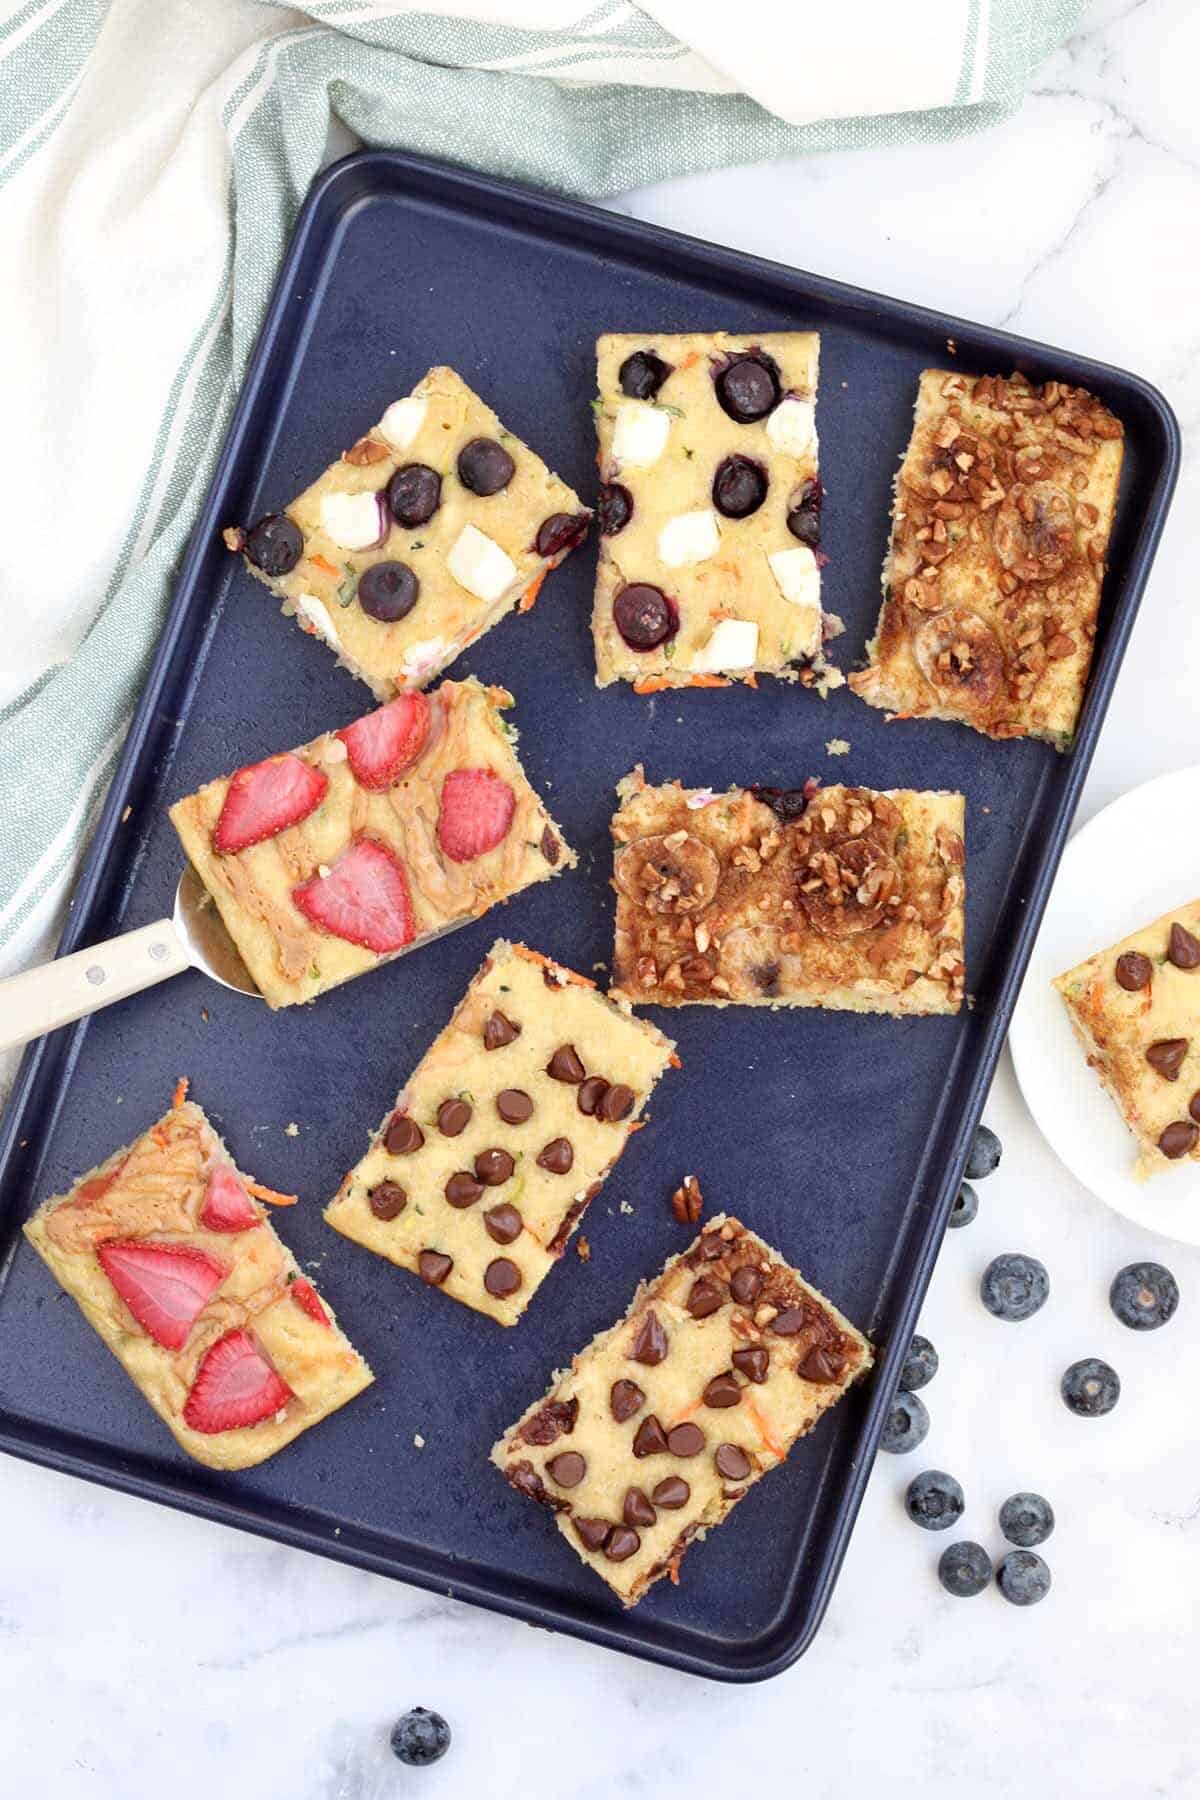 sheet pan pancakes topped with strawberries, chocolate chips, bananas, blueberries, and cream cheese.